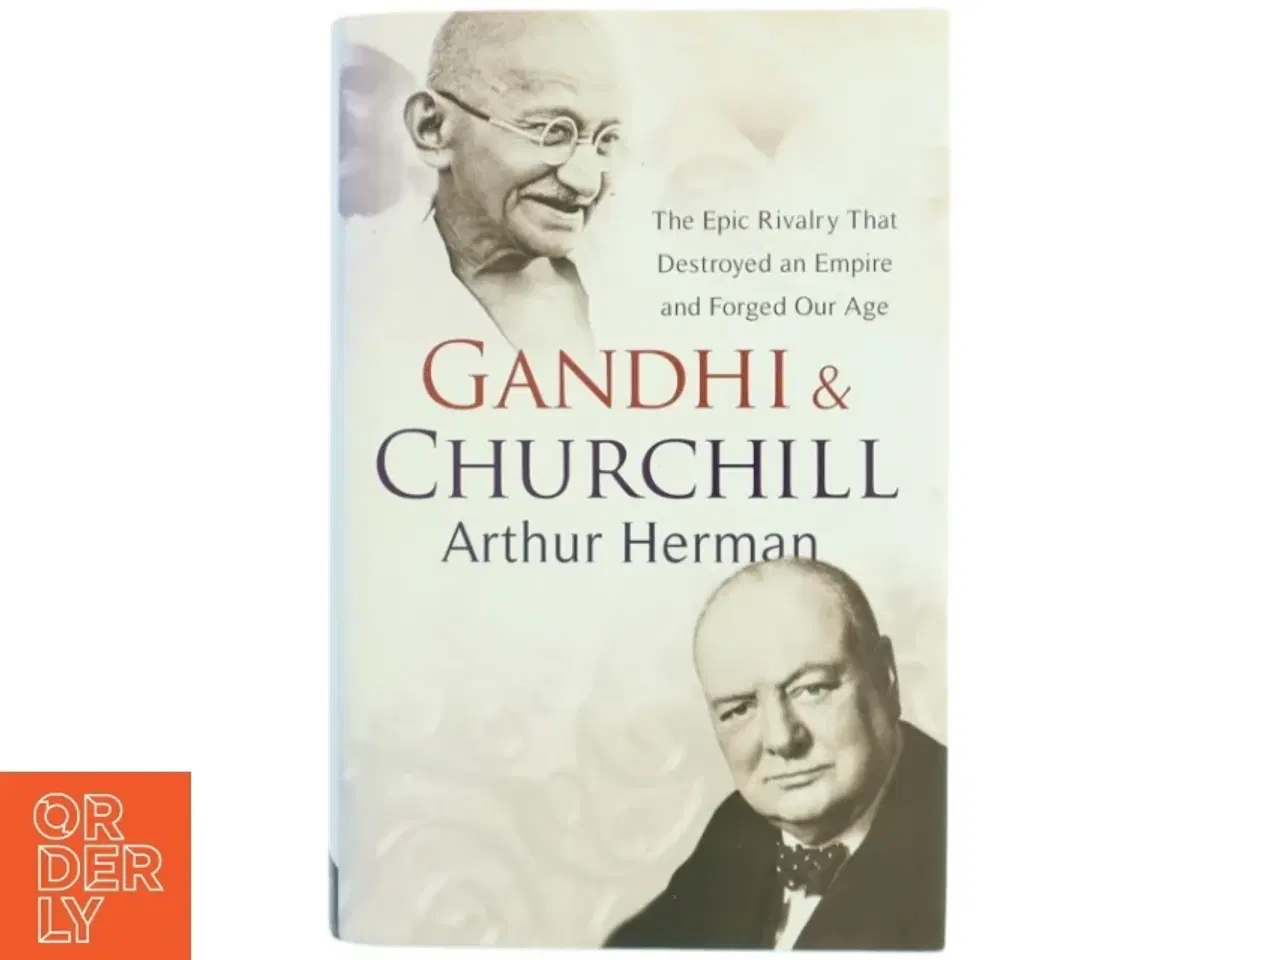 Billede 1 - Gandhi & Churchill : the epic rivalry that destroyed an empire and forged our age af Arthur Herman (Bog)